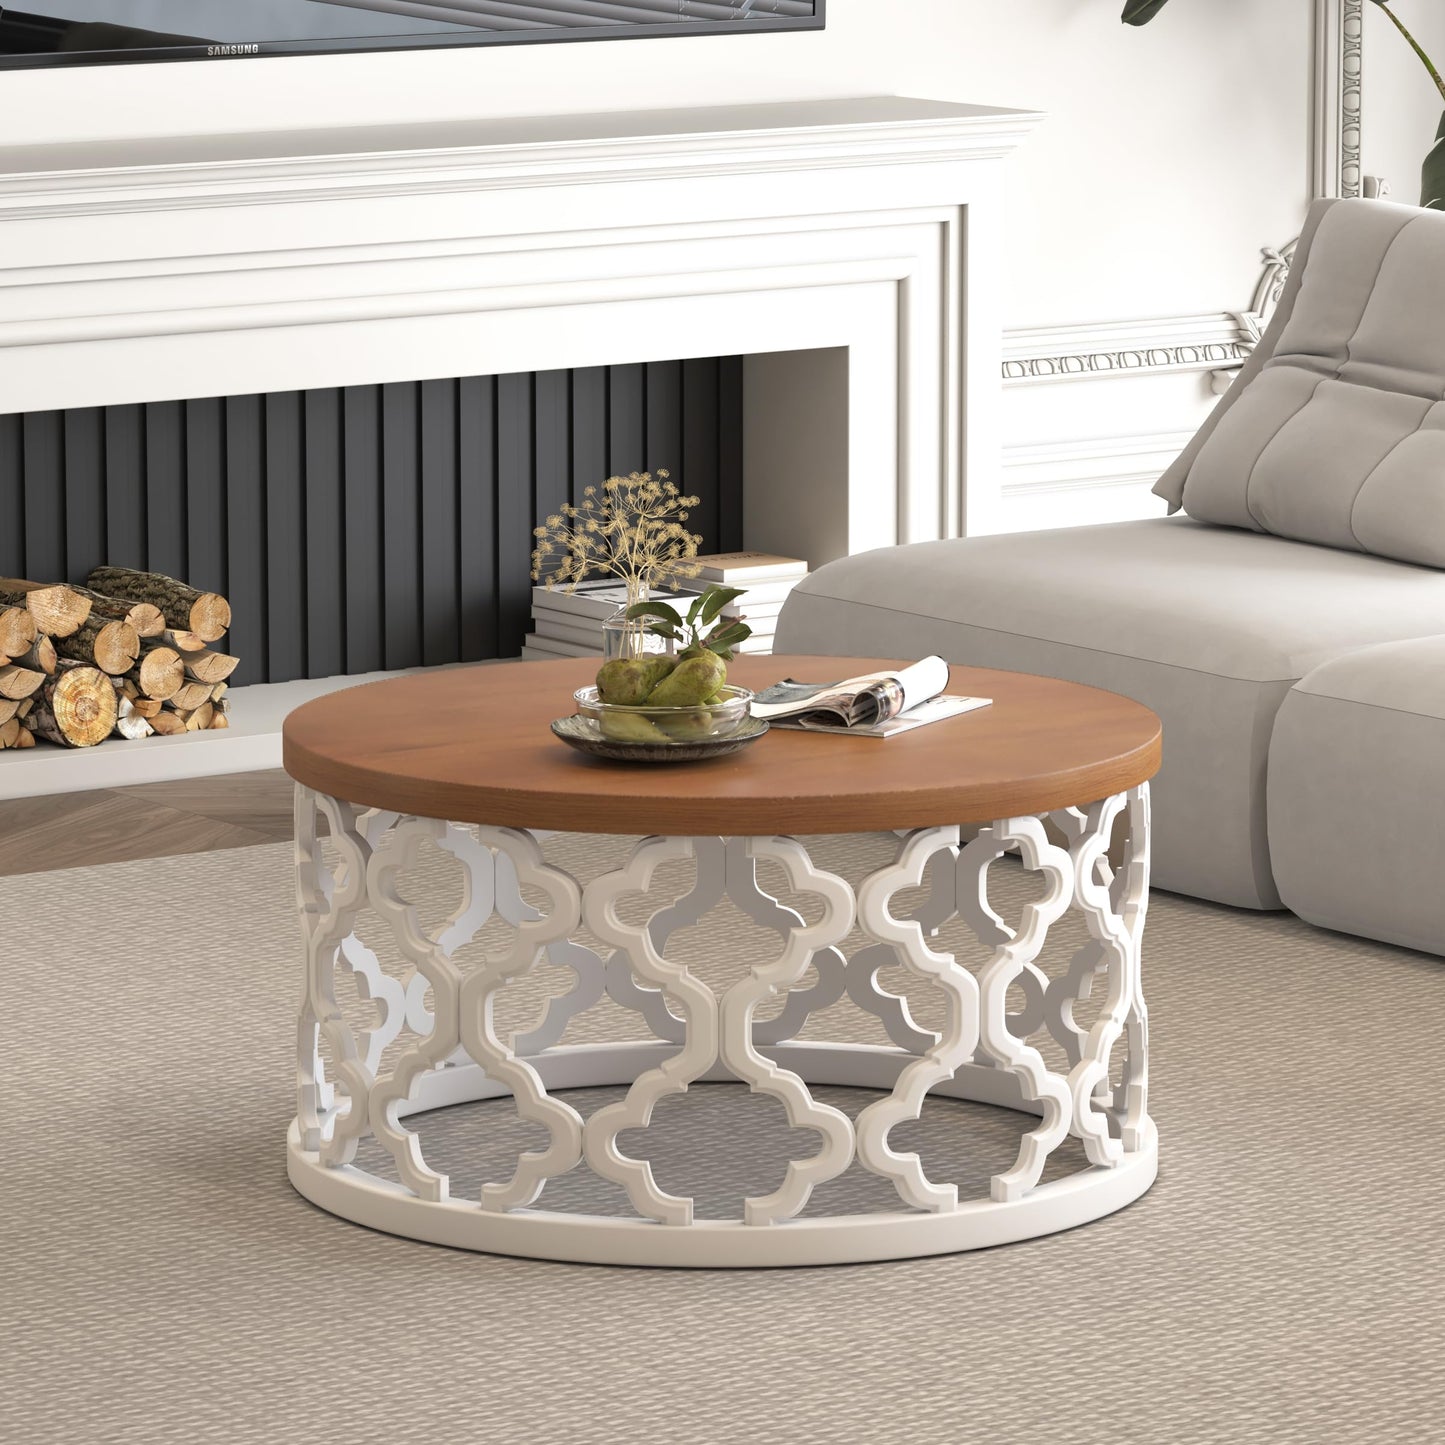 Orweiin Round Coffee Table, Distressed Wood Top，Rustic Farmhouse Coffee Table with Curved Motif Frame Base for Living Room, White